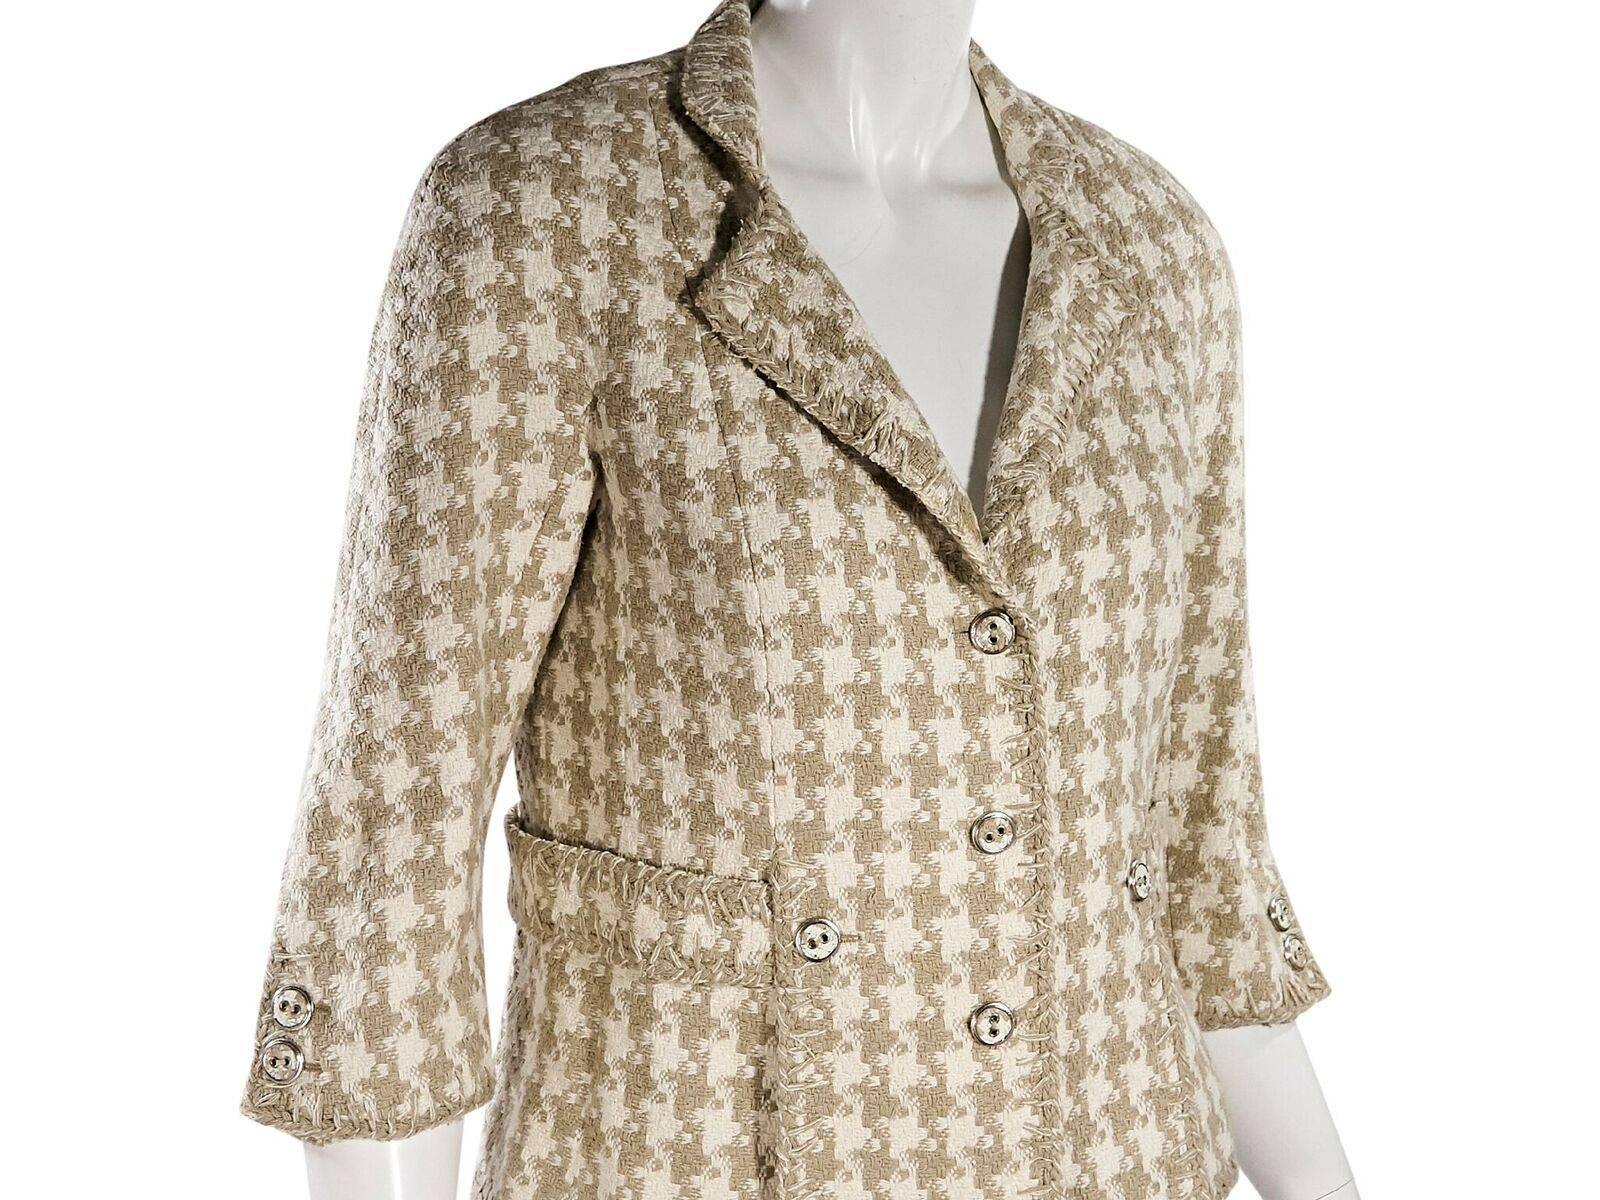 Product details:  Tan and white silk boucle jacket by Chanel.  Notched lapel.  Elbow-length sleeves.  Double-button detail at cuffs.  Button-front closure.  Silvertone hardware.  Label size FR 42.  34